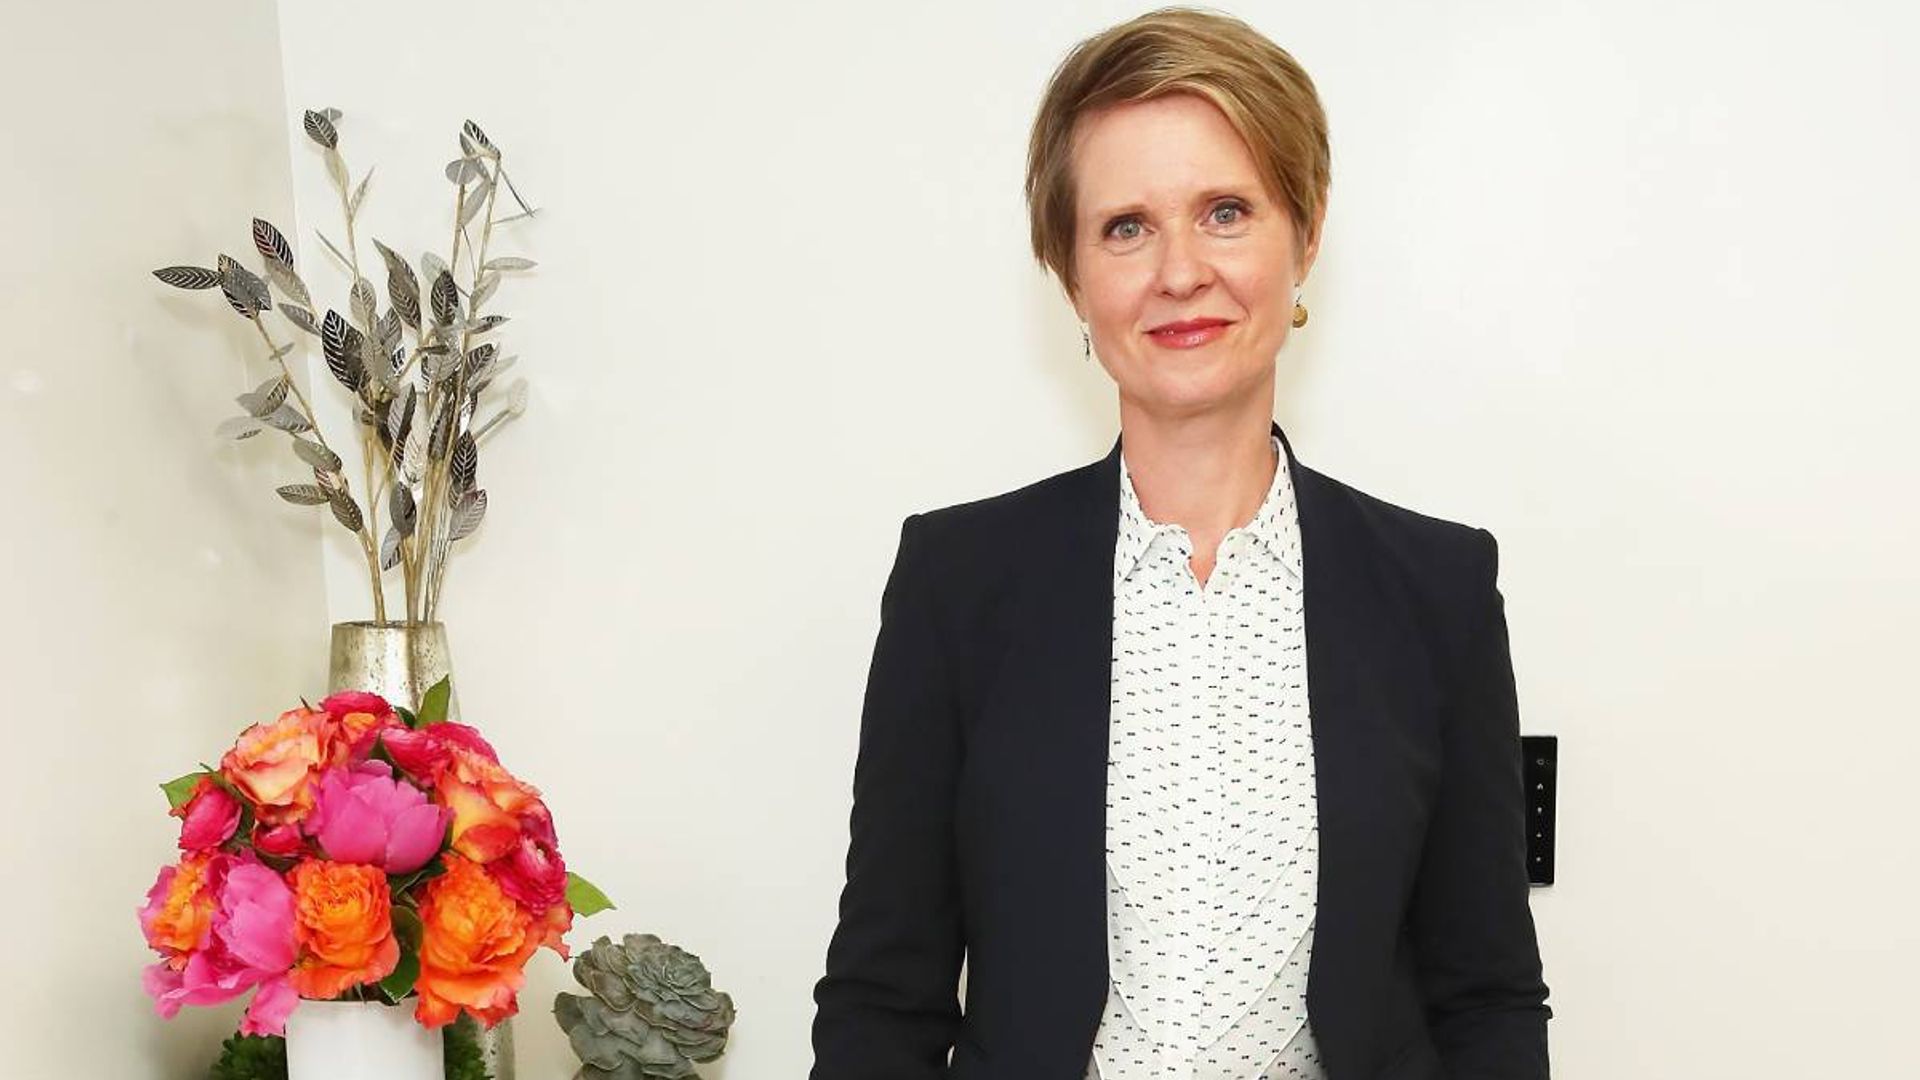 Cynthia Nixon shares rare photo of son inside NY home during special celebration